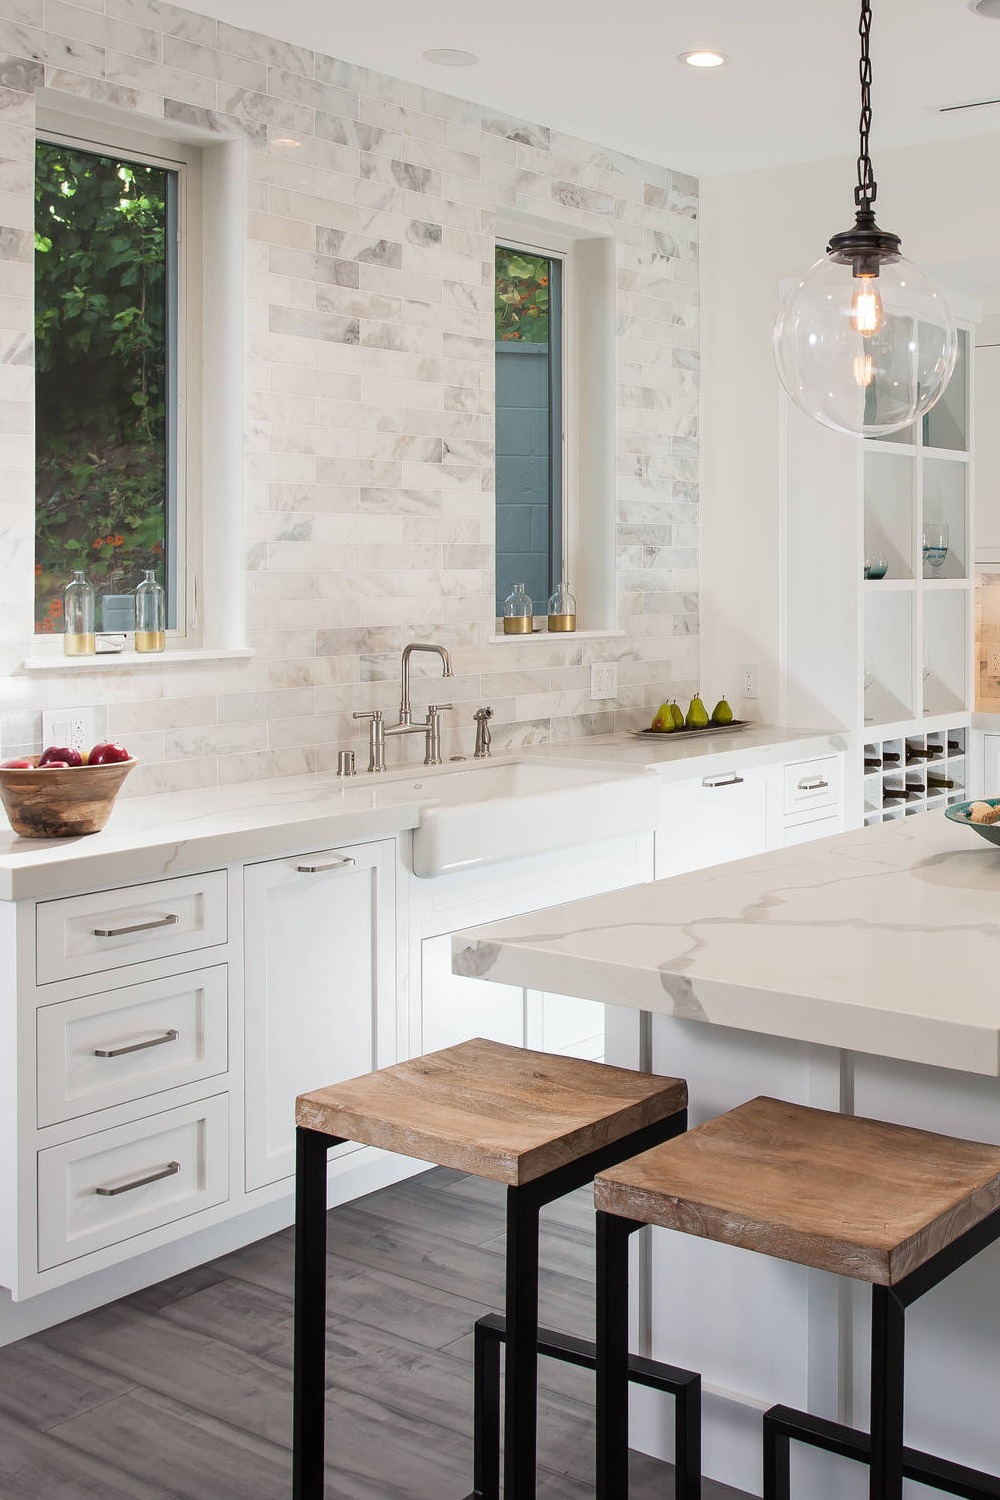 Classic Subway Tile Upper Cabinets White KItchen Cabinets Granite Countertops Marble Backsplash White Kitchen Cabinets